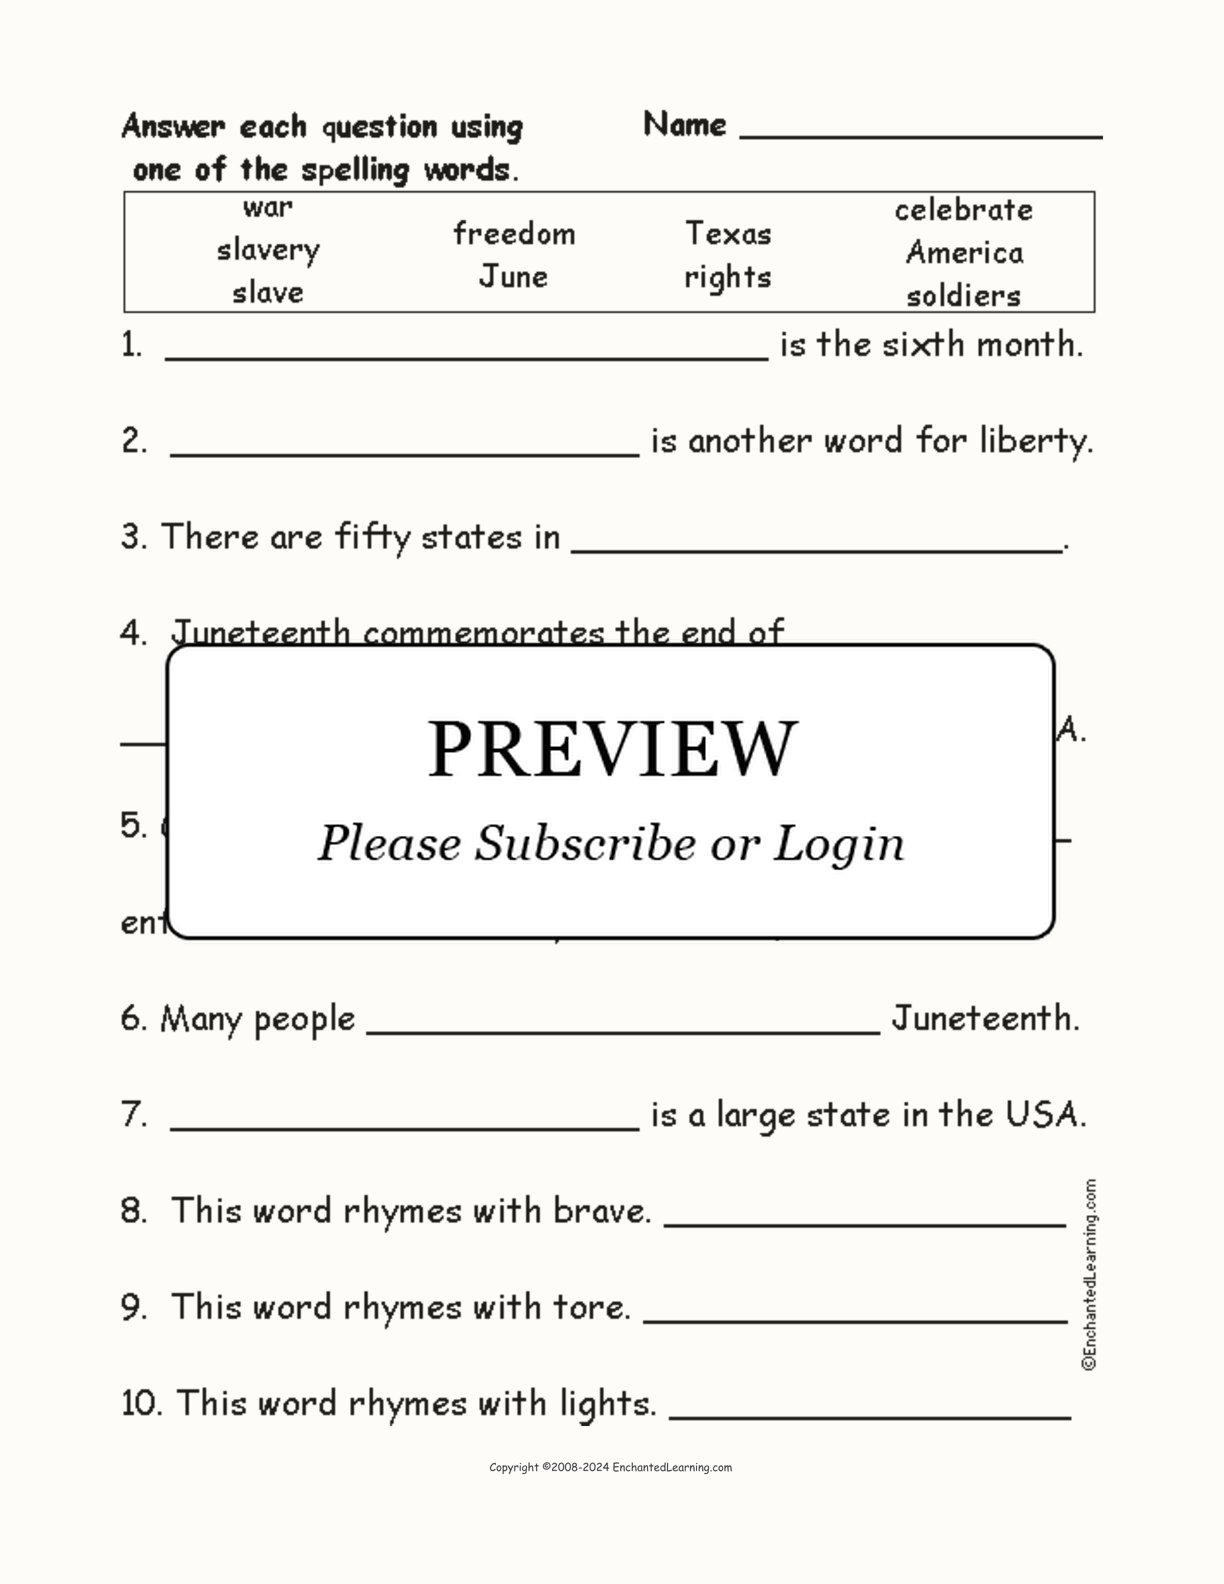 Juneteenth Spelling Word Questions interactive worksheet page 1